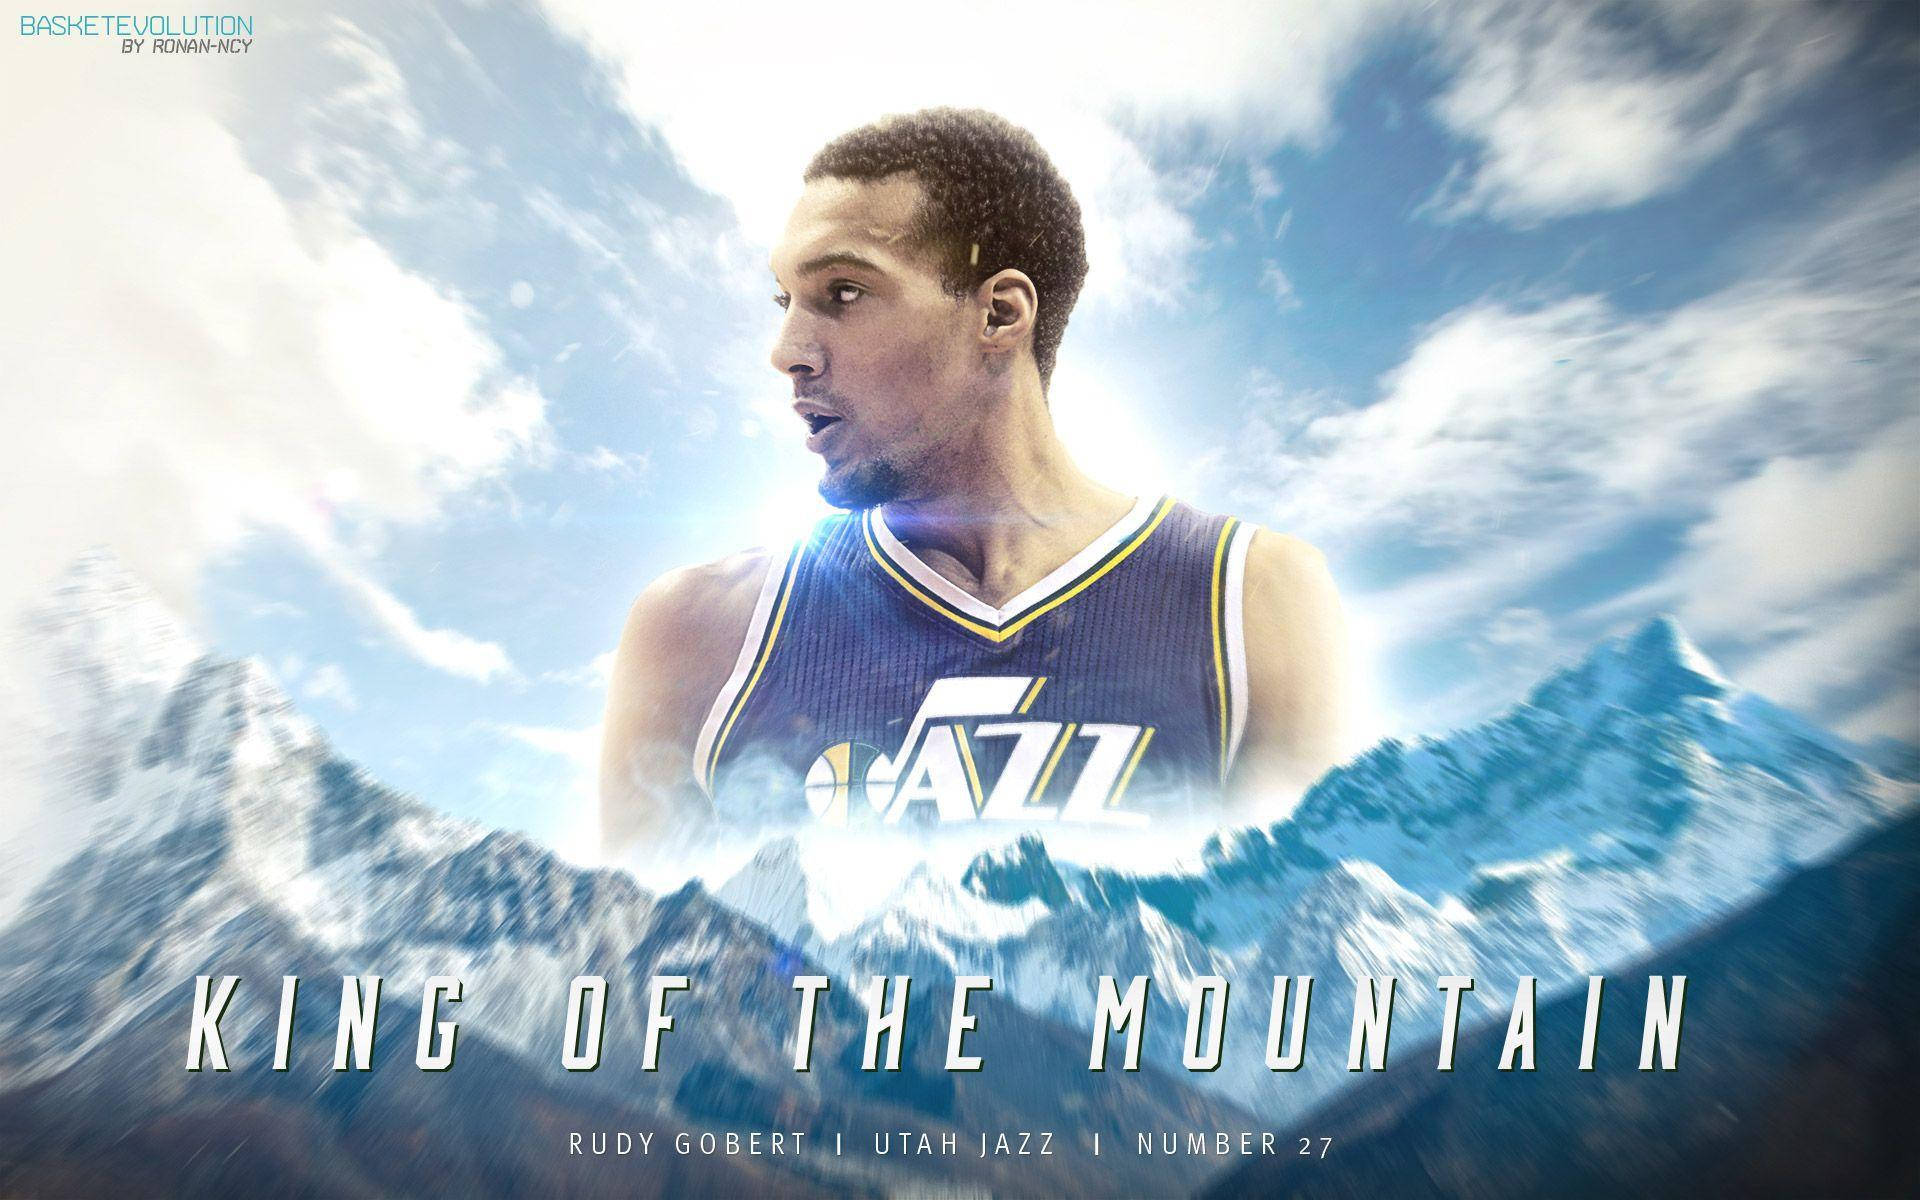 Rudy Gobert King Of The Mountain Background